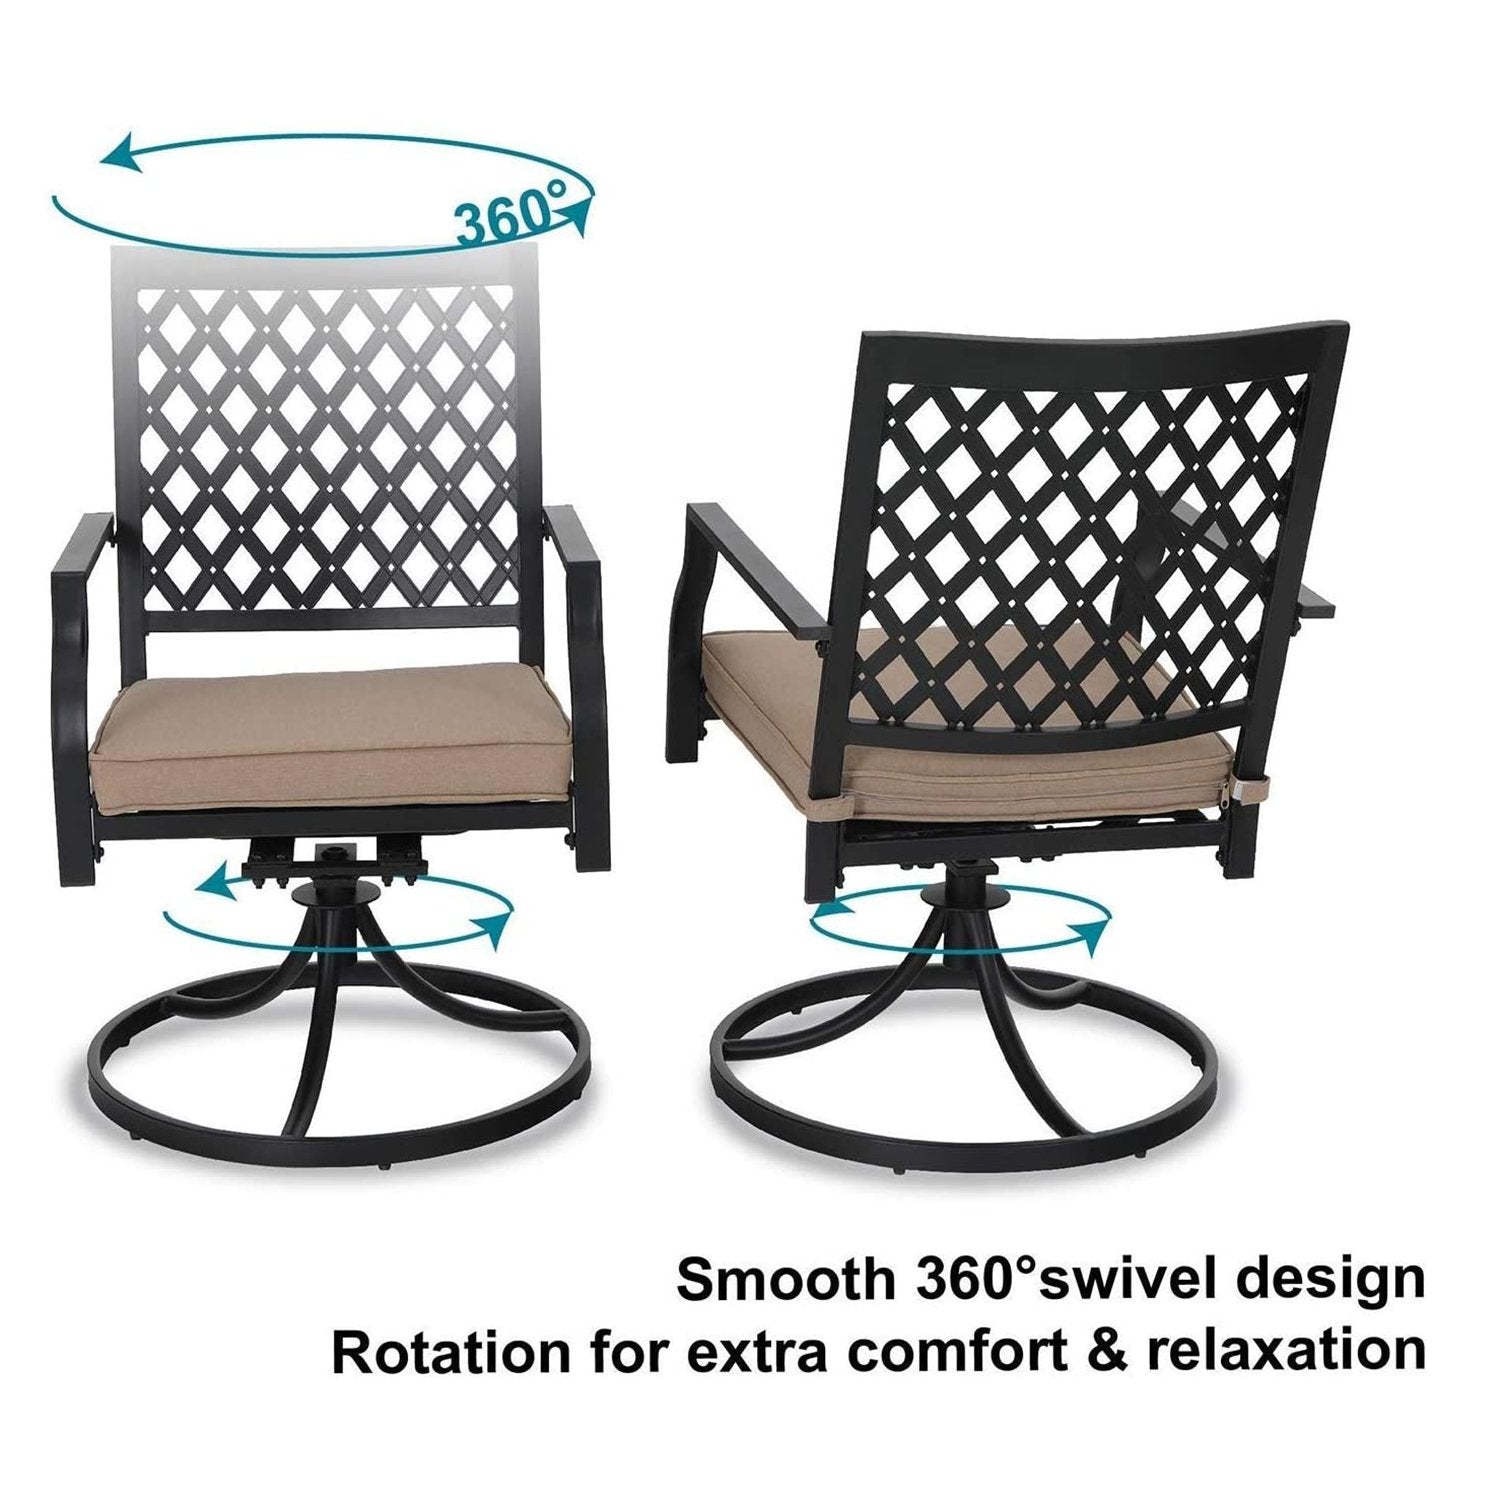 PHI VILLA Wood-look Table and 6 Swivel Chairs 7-Piece Metal Steel Outdoor Patio Dining Set